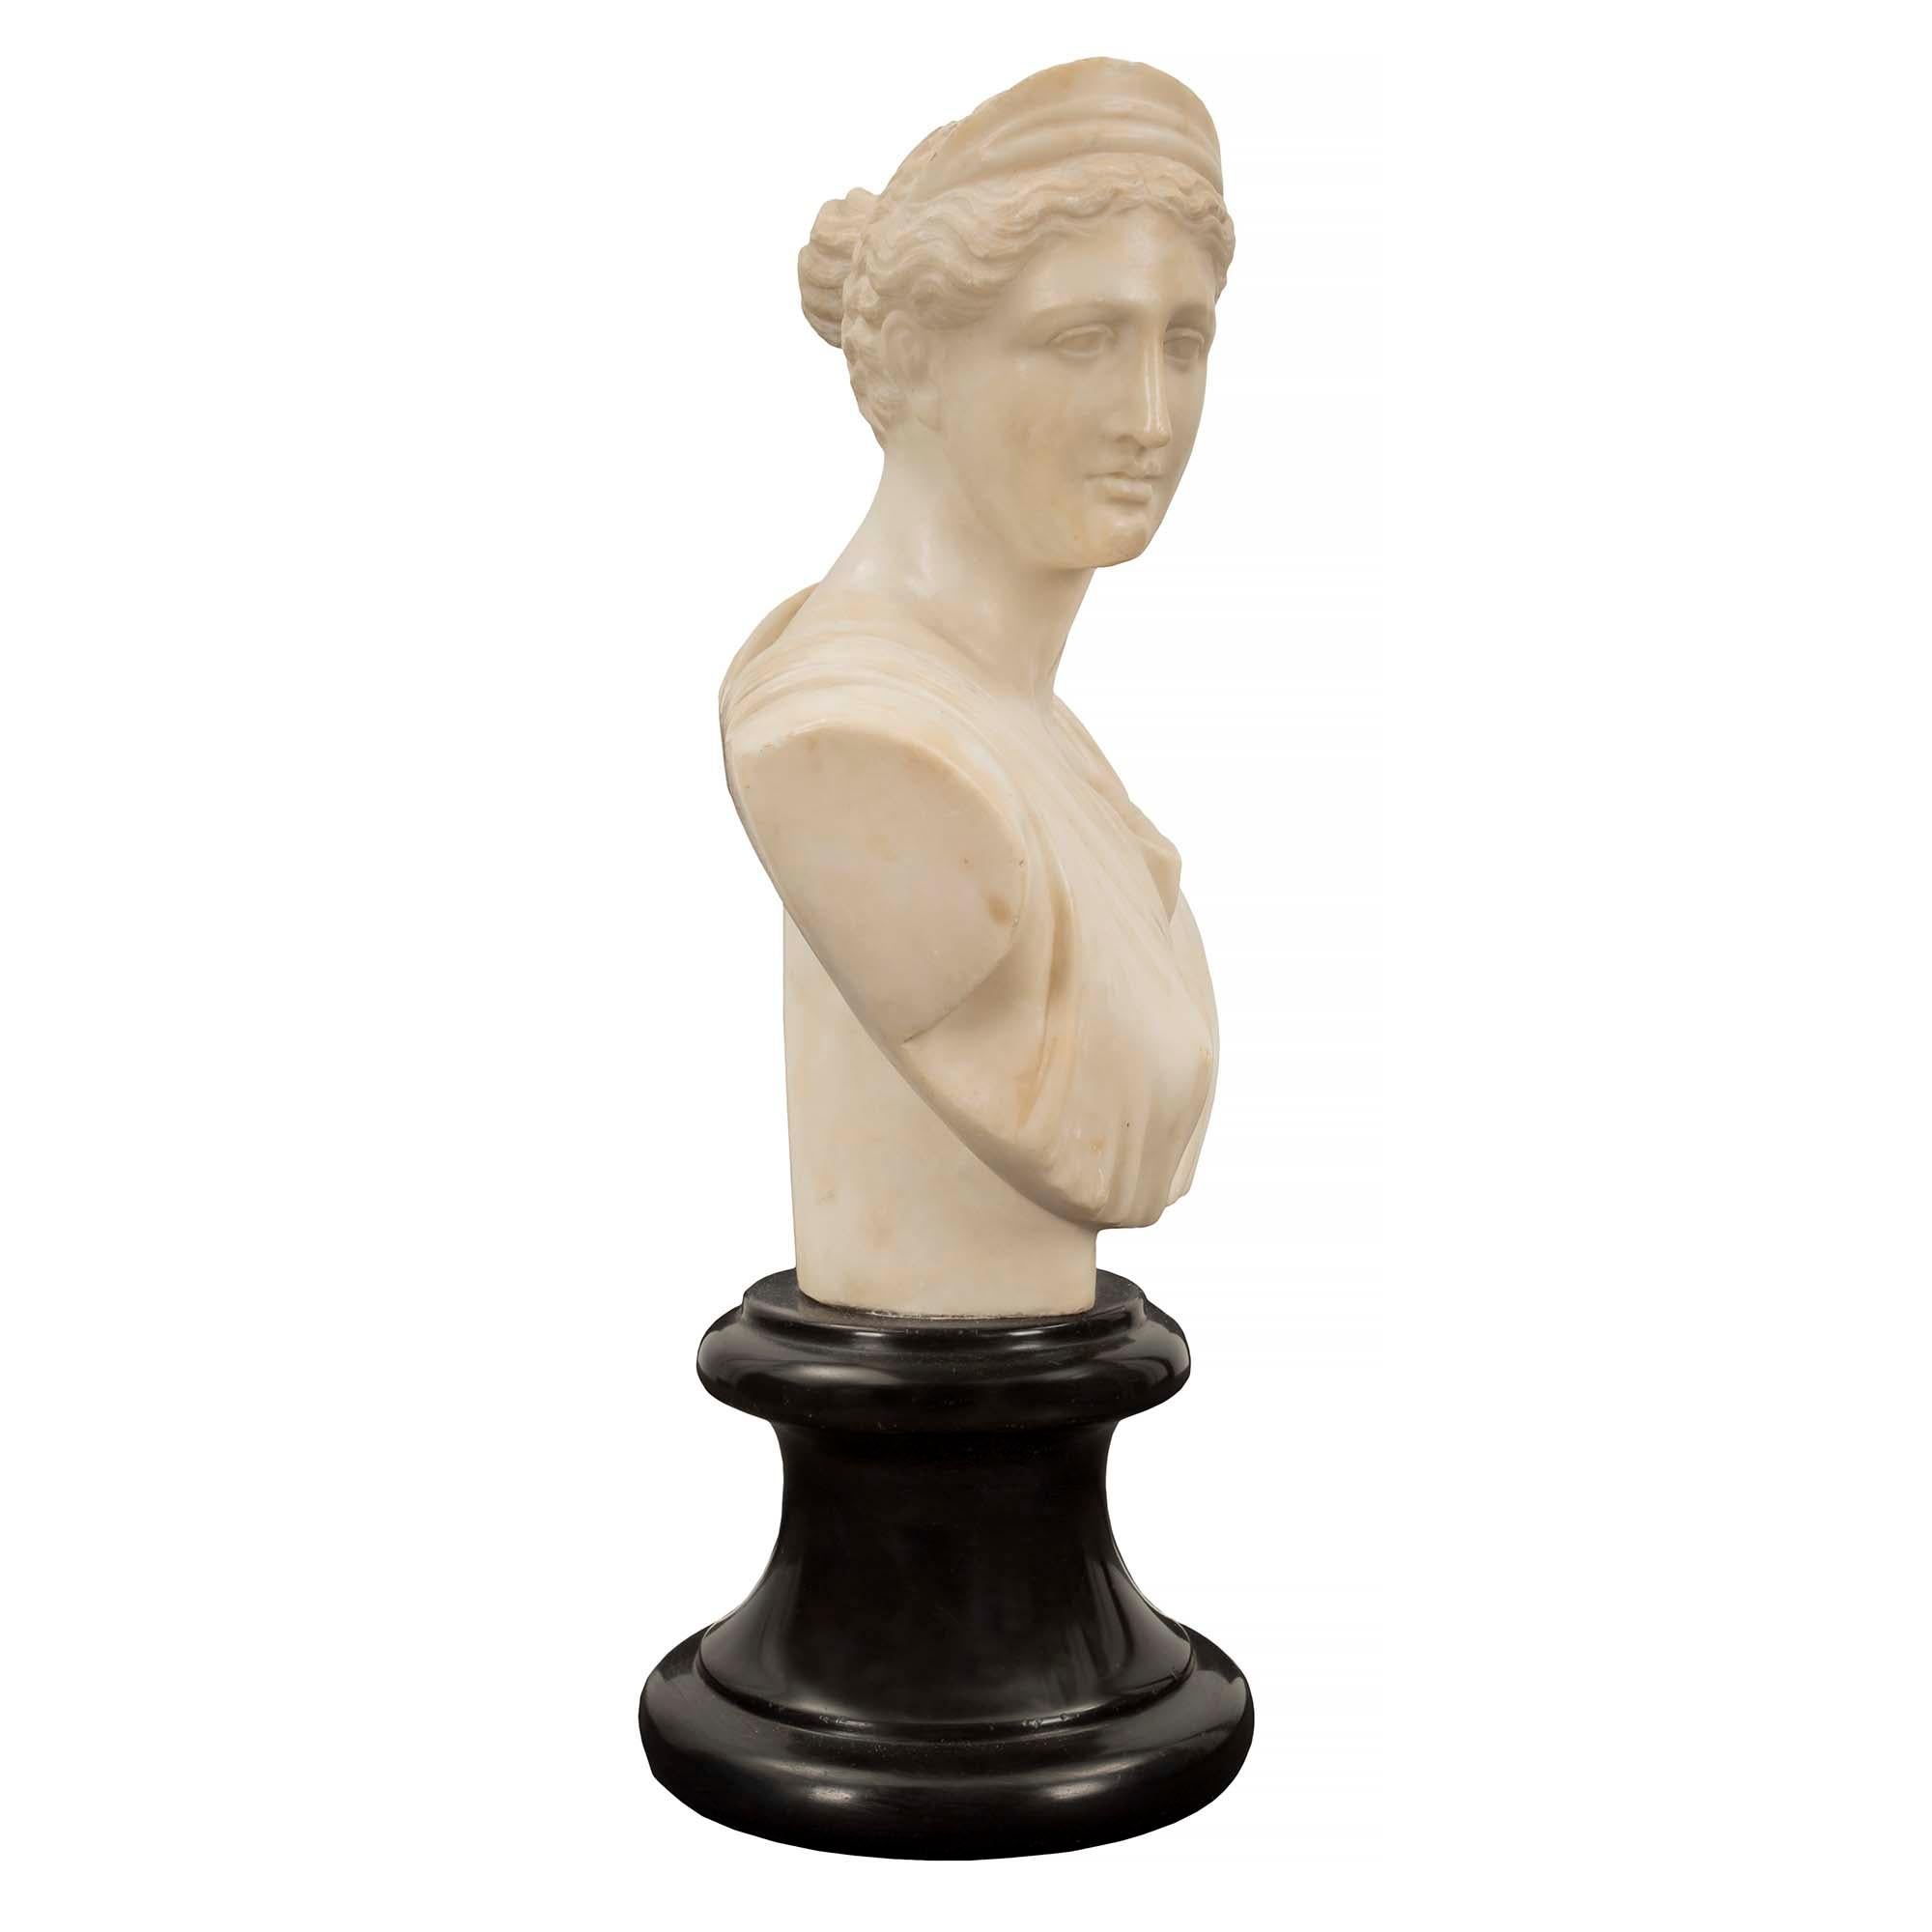 An elegant French 19th century alabaster bust of Diana the Huntress. The beautiful bust is raised by a circular mottled black Belgian marble base. The exceptionally well executed Alabaster bust depicts Diana the Huntress looking to her right draped